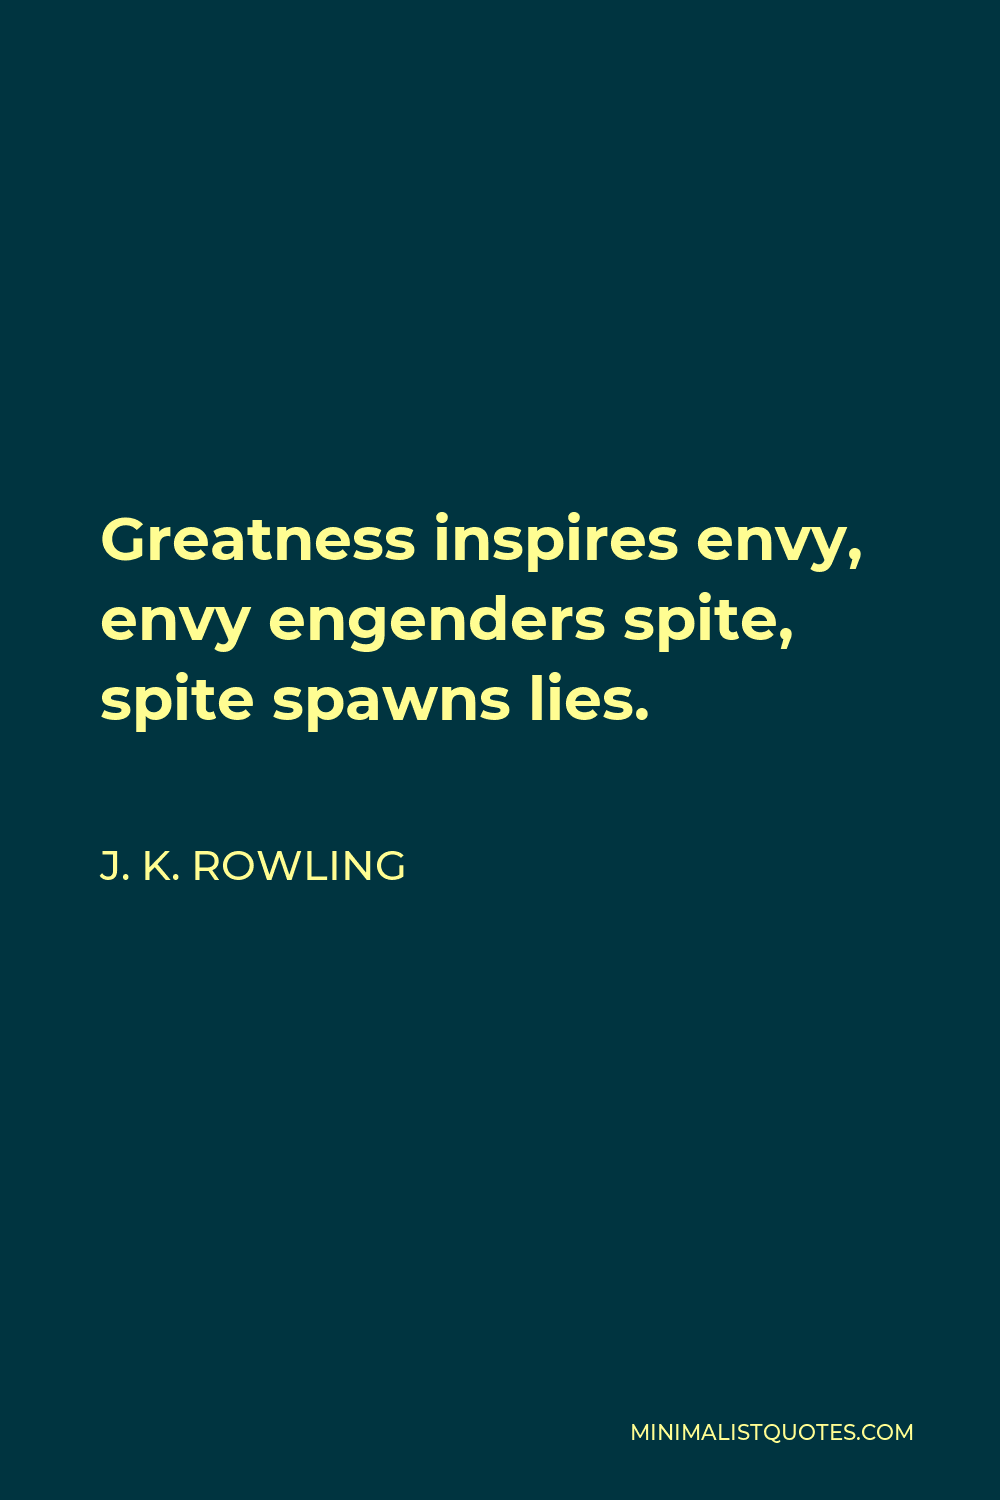 J. K. Rowling Quote - Greatness inspires envy, envy engenders spite, spite spawns lies.